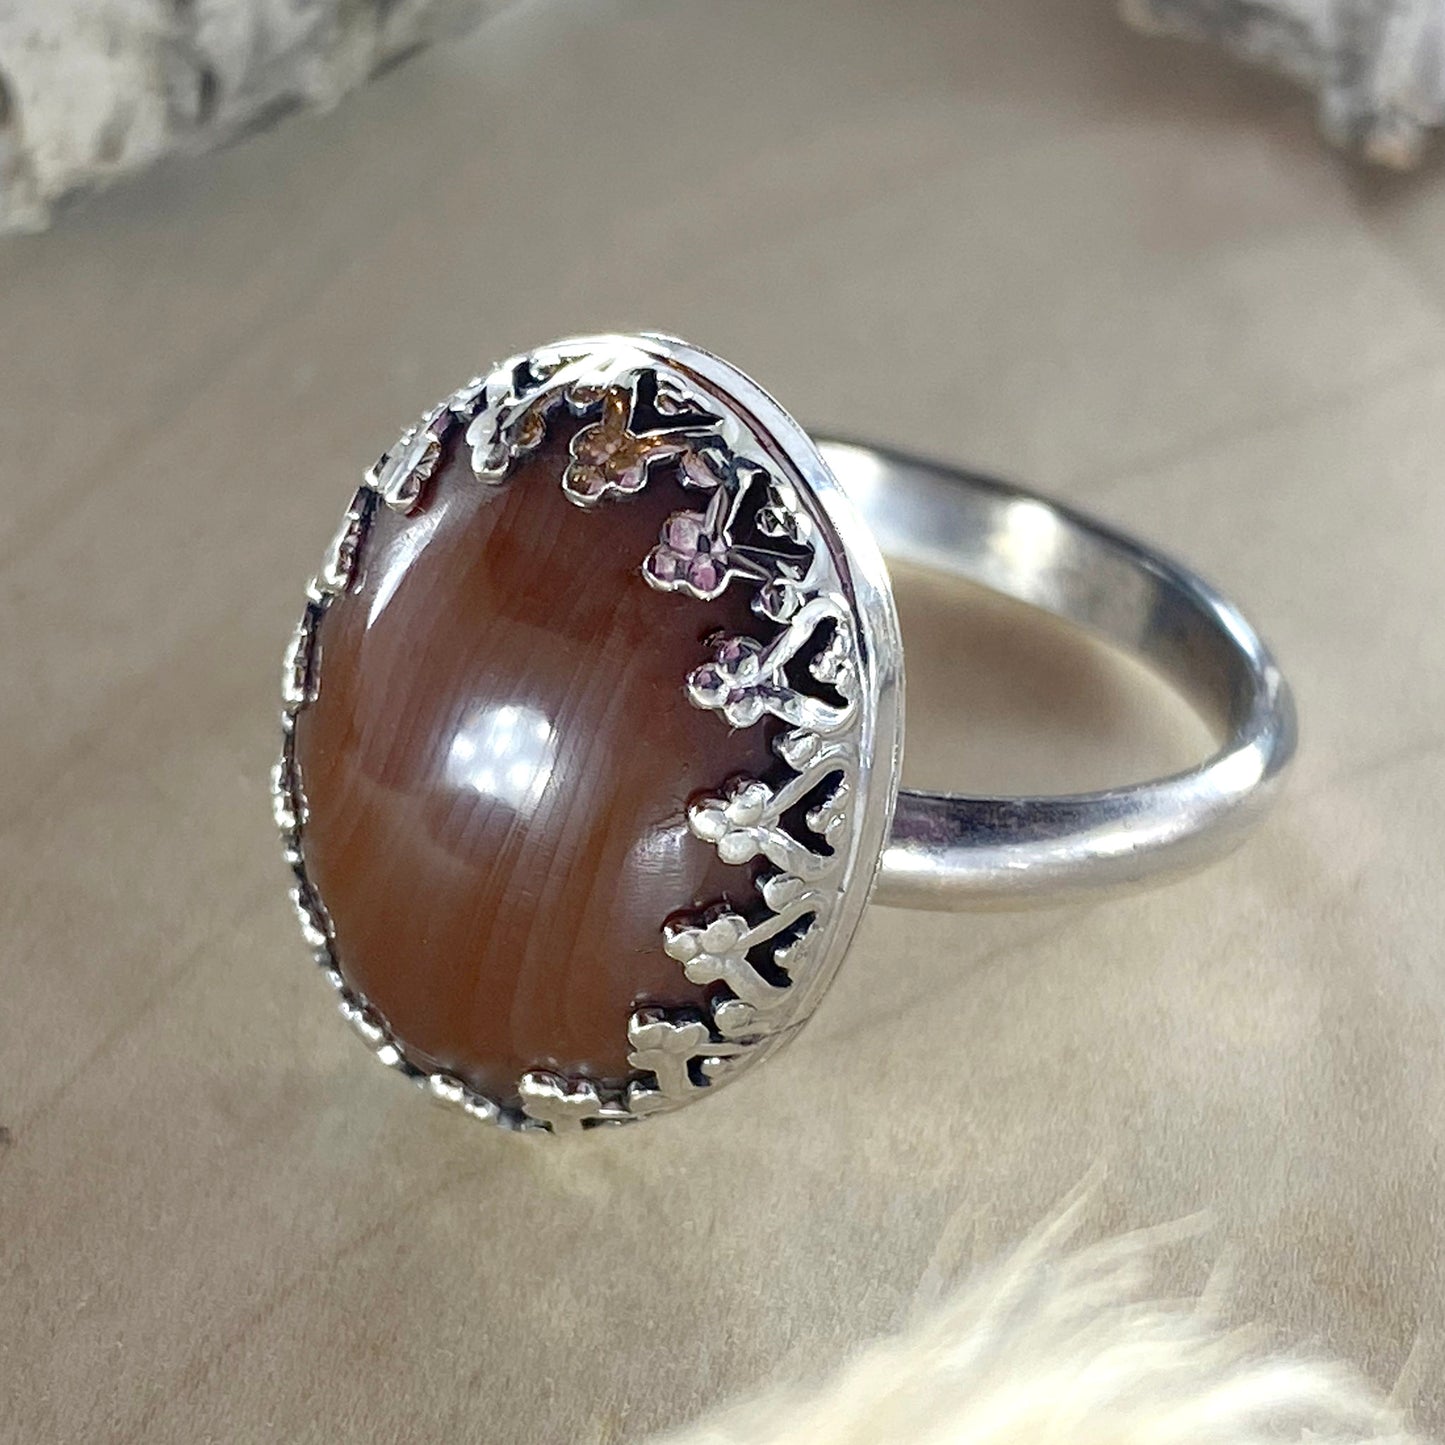 Lake Superior Agate Ring - Stone Treasures by the Lake